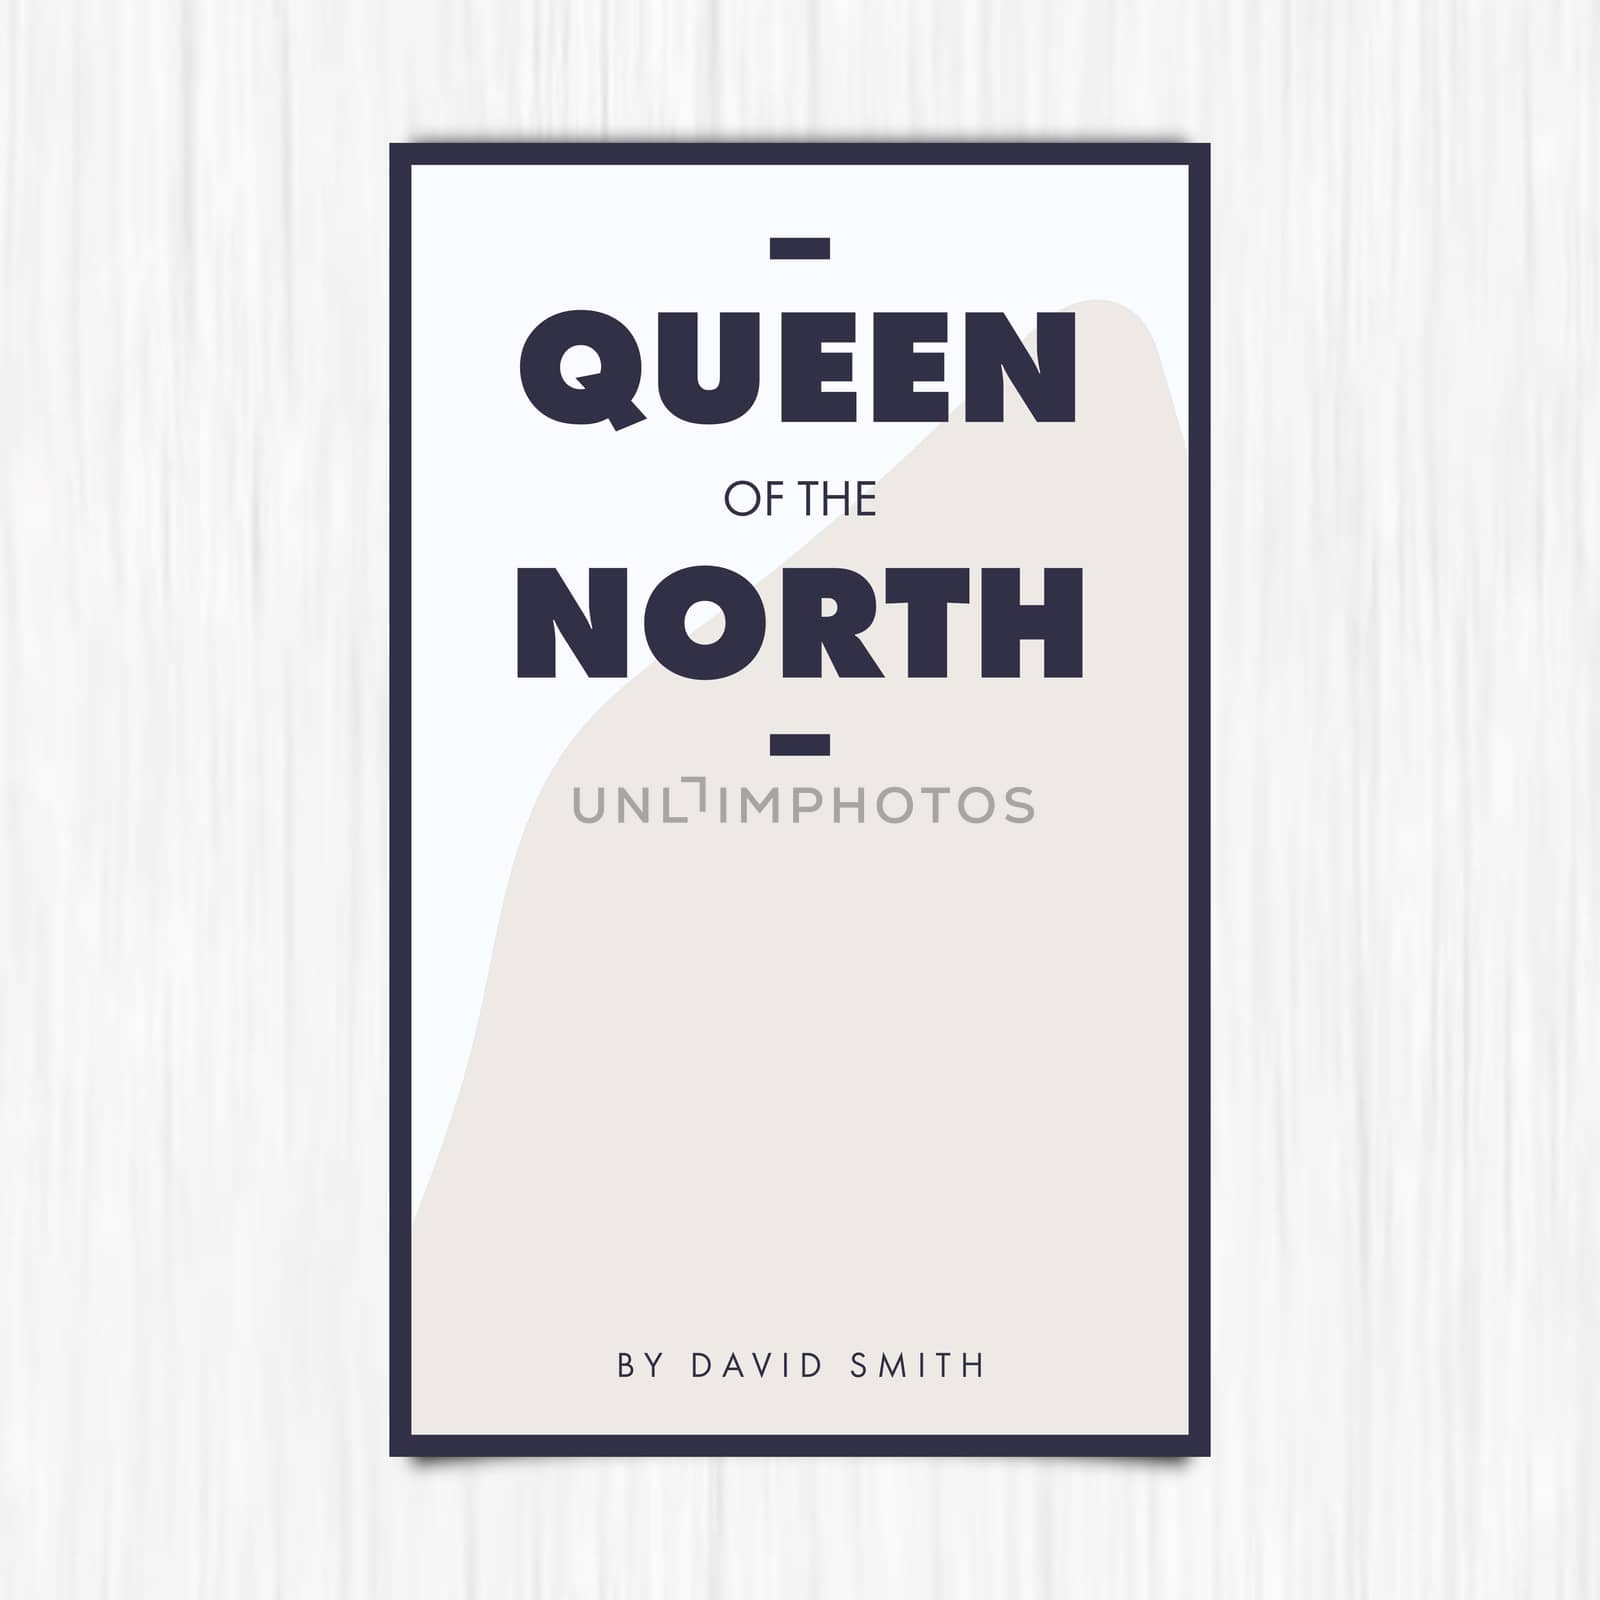 Vector of novel cover with queen of the north text by Wavebreakmedia